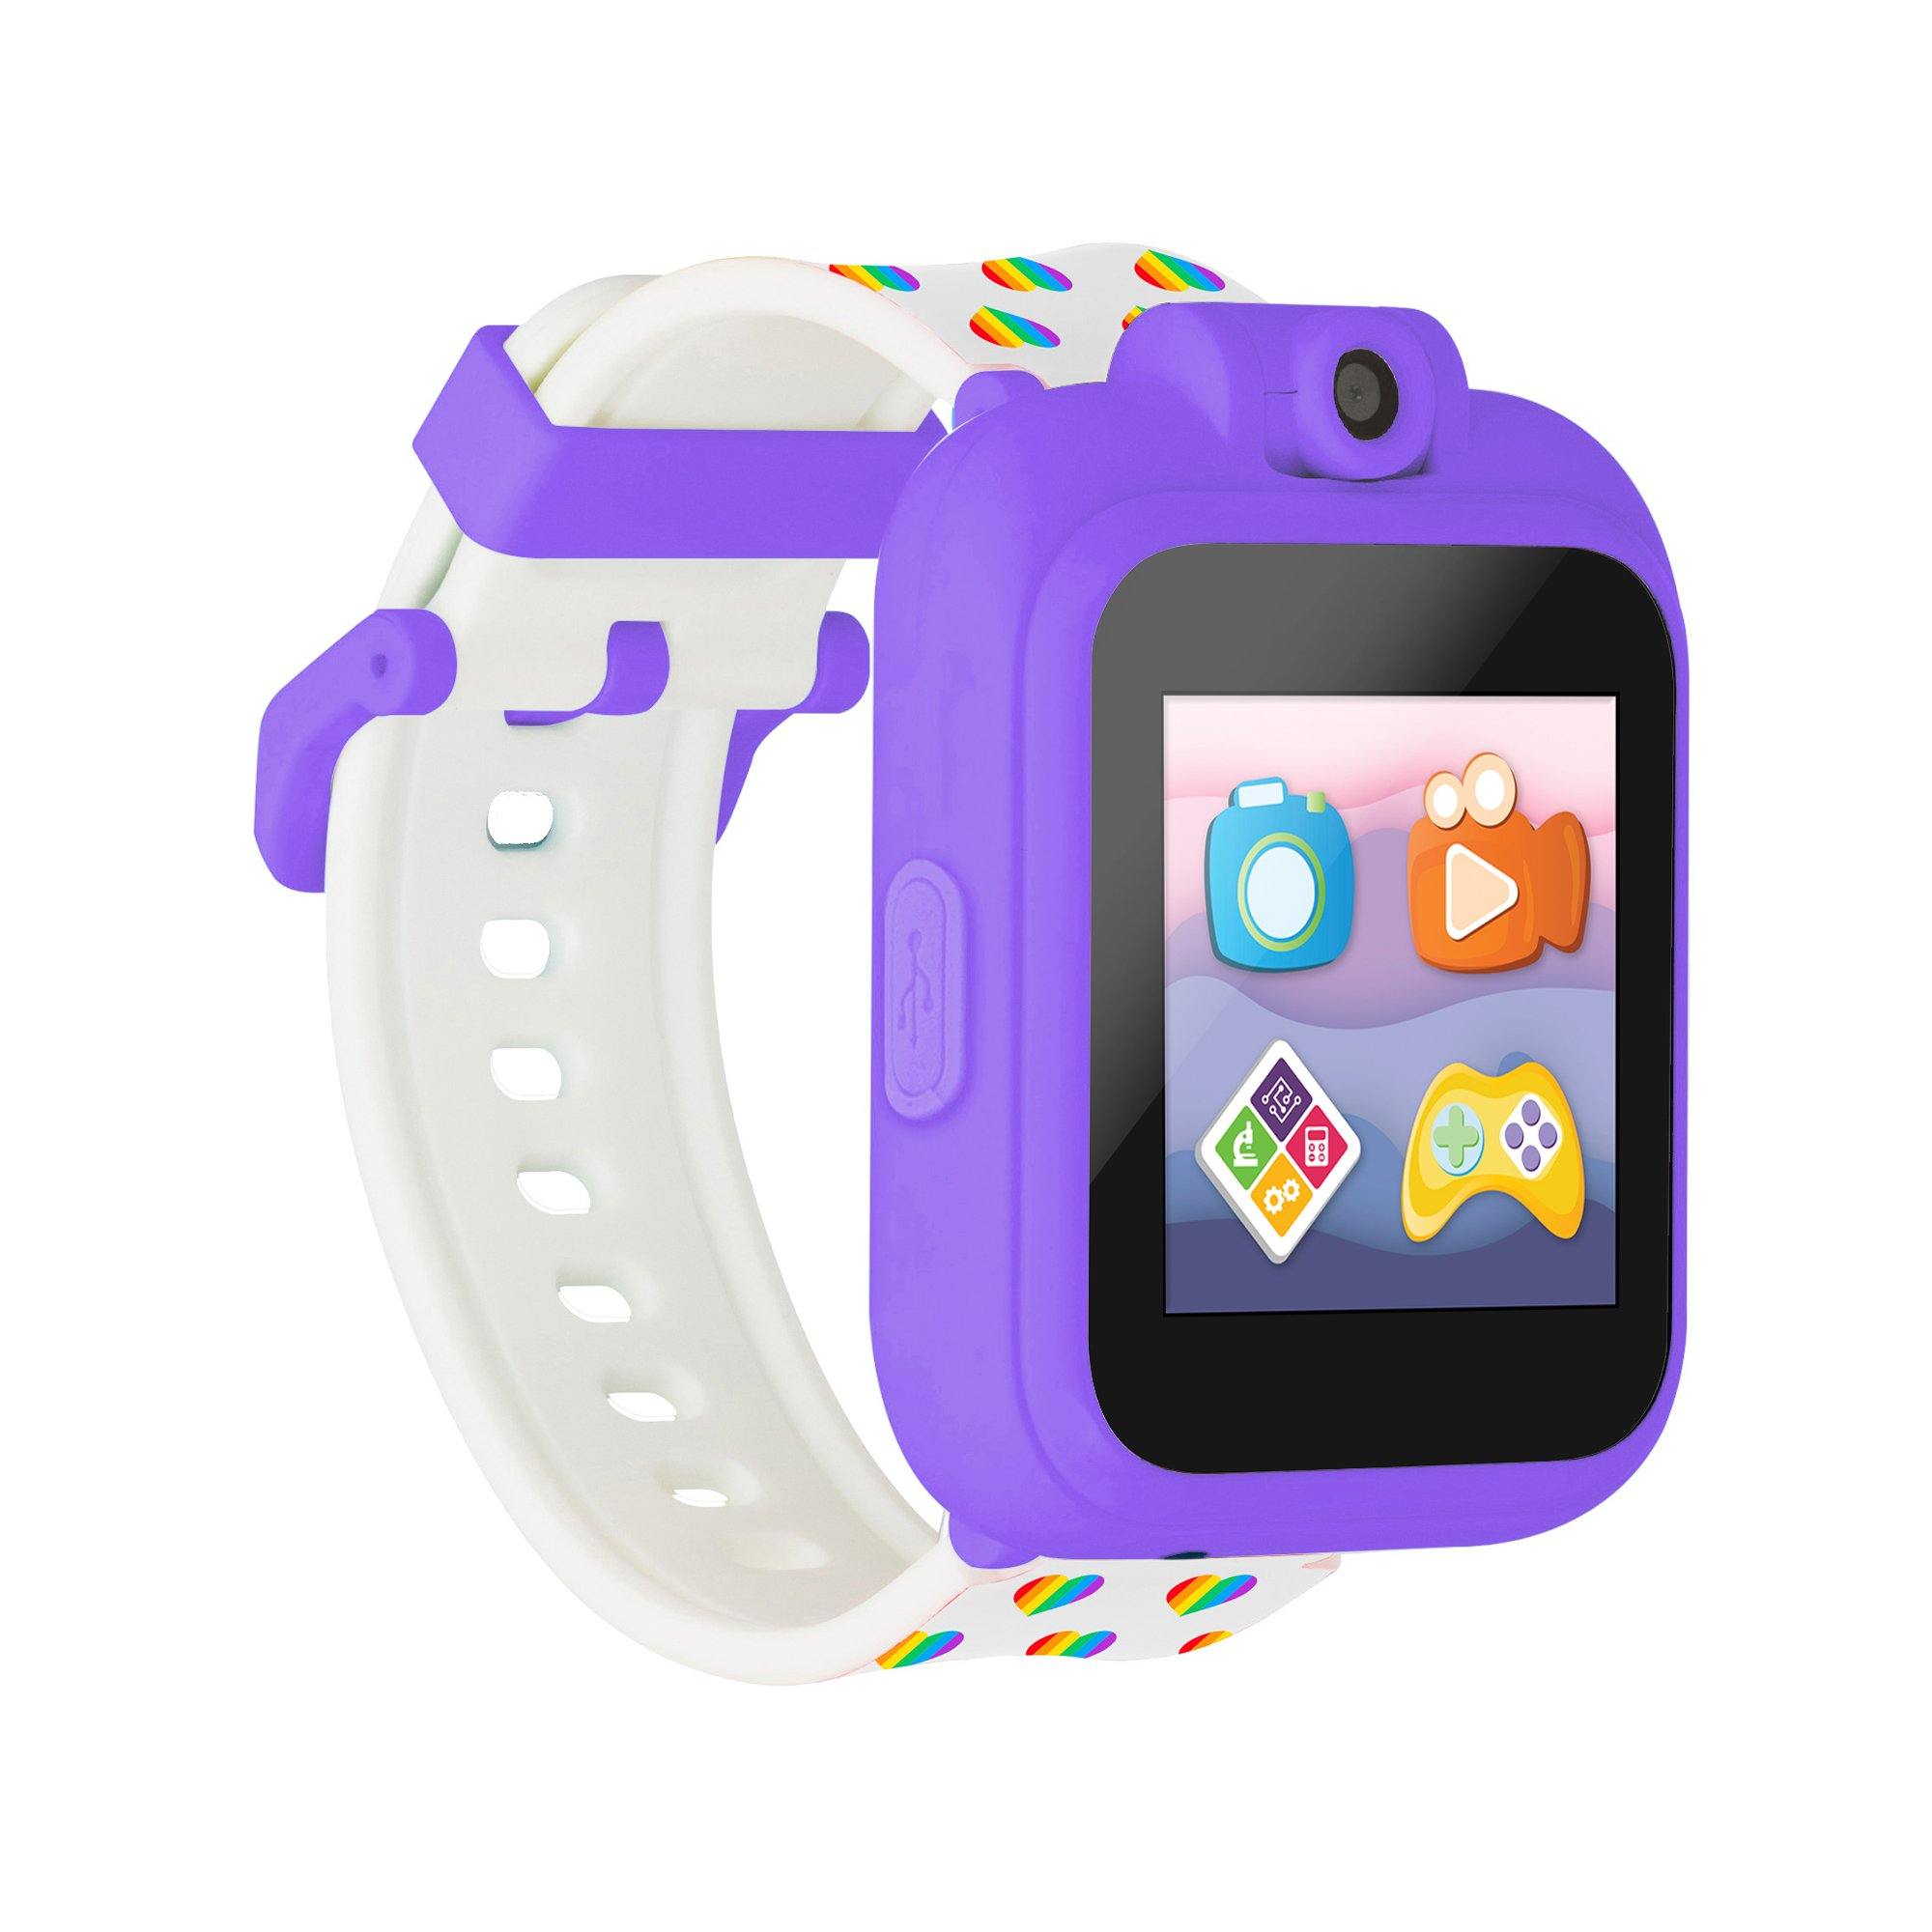 PlayZoom 2 Kids Smartwatch: Purple/White Hearts affordable smart watch